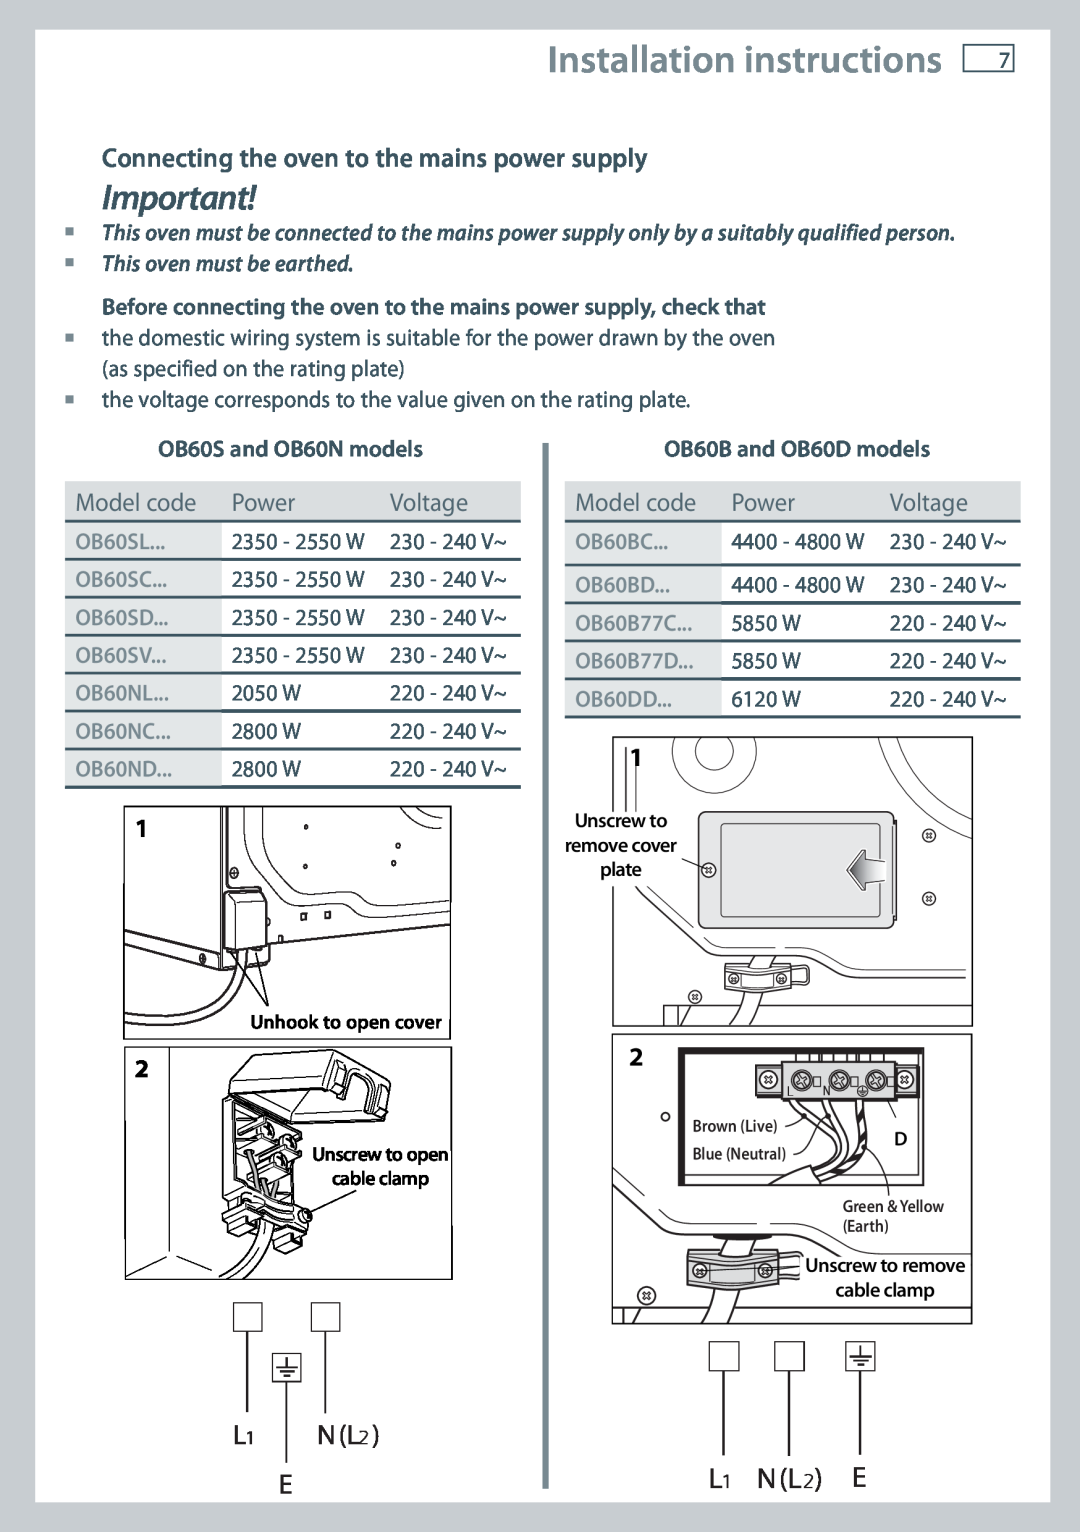 Fisher & Paykel OB60 Installation instructions, L1 N L2 E, Connecting the oven to the mains power supply, Model code 